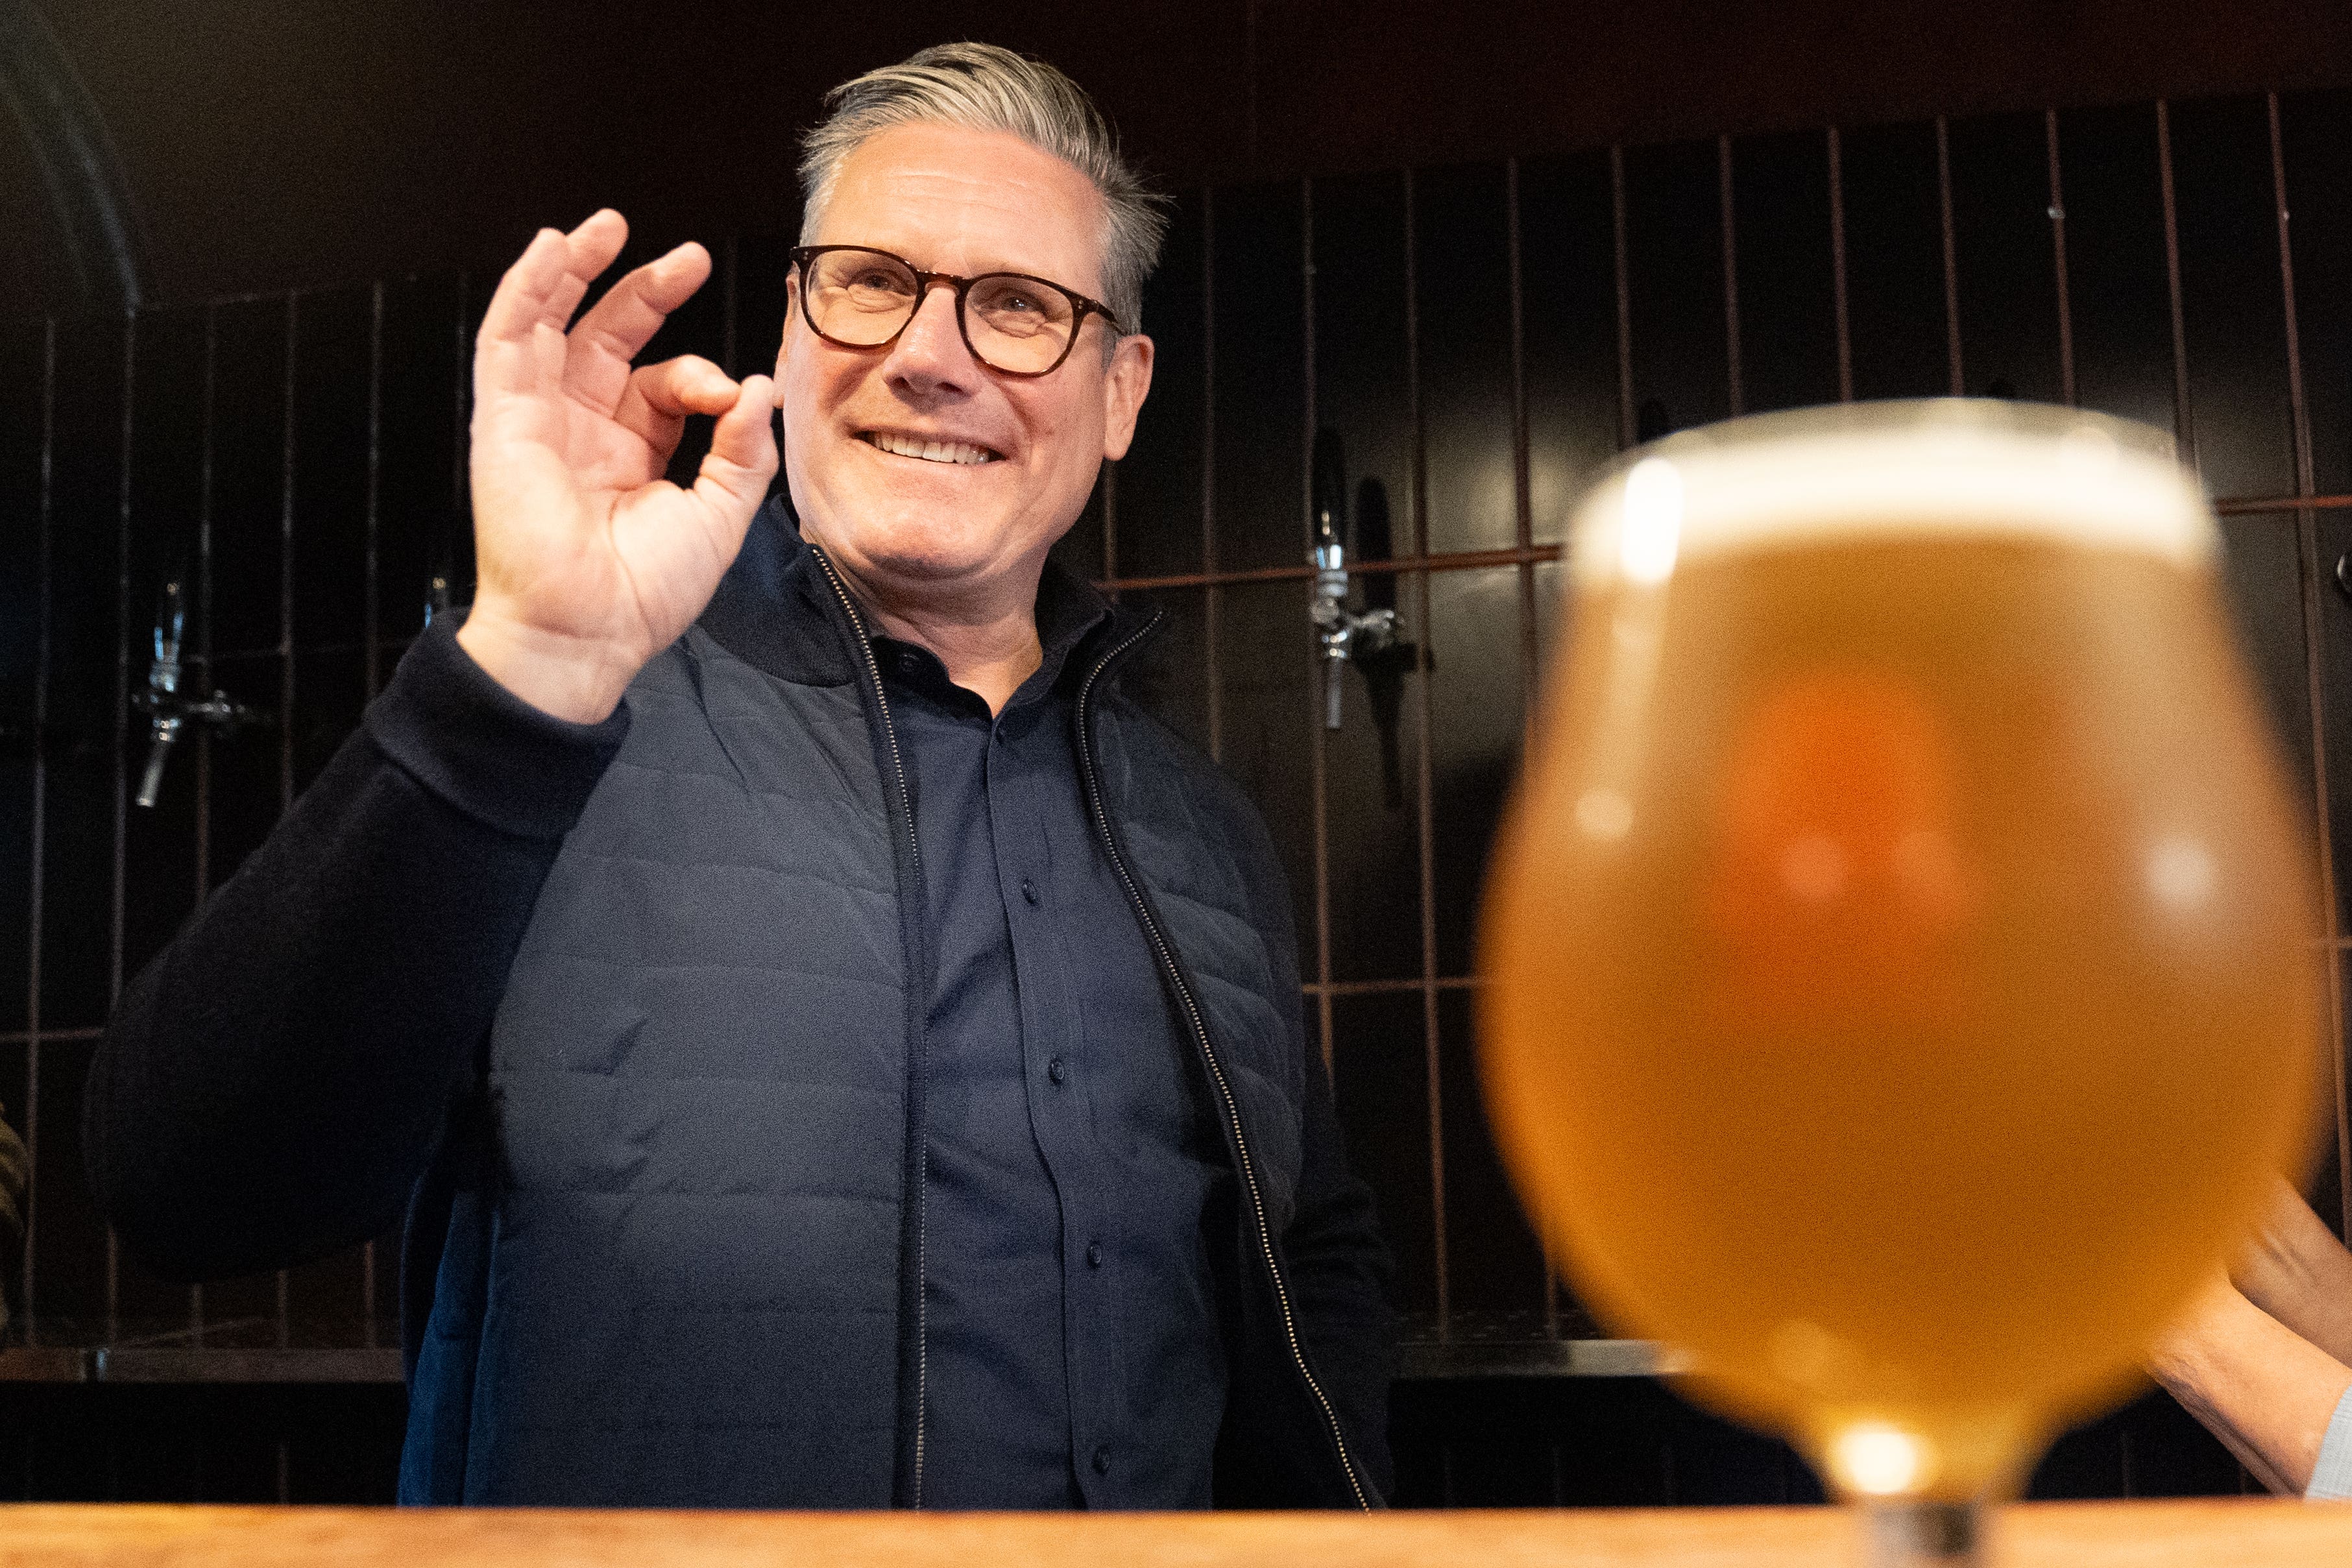 Labour leader Sir Keir Starmer helps to serve drinks during a campaign visit to a small business – 3 Lock’s Brewery in Camden (Stefan Rousseau/PA)